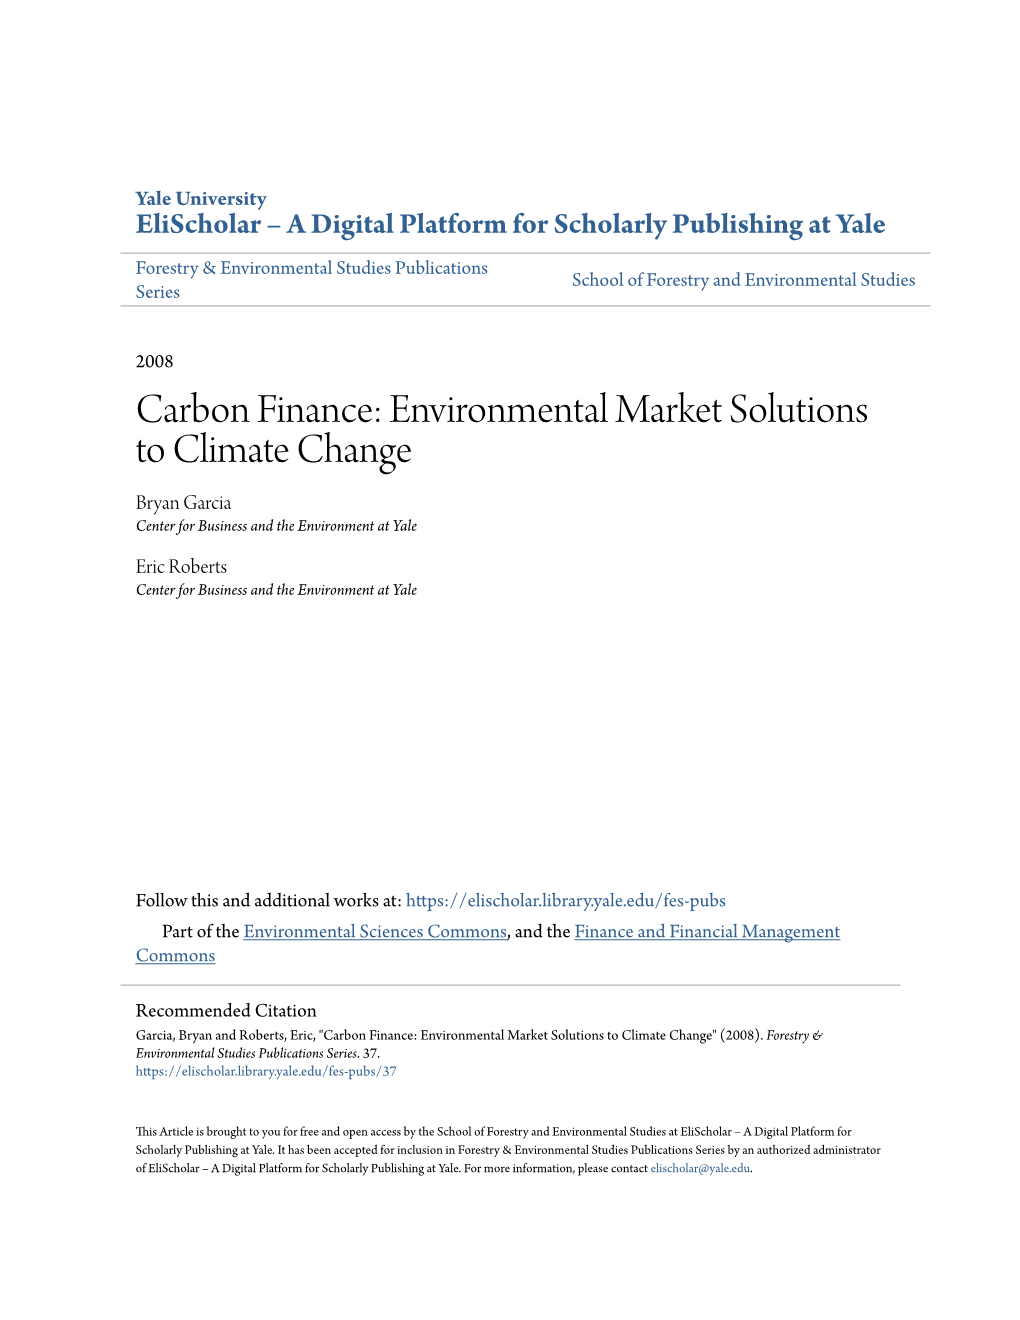 Carbon Finance: Environmental Market Solutions to Climate Change Bryan Garcia Center for Business and the Environment at Yale